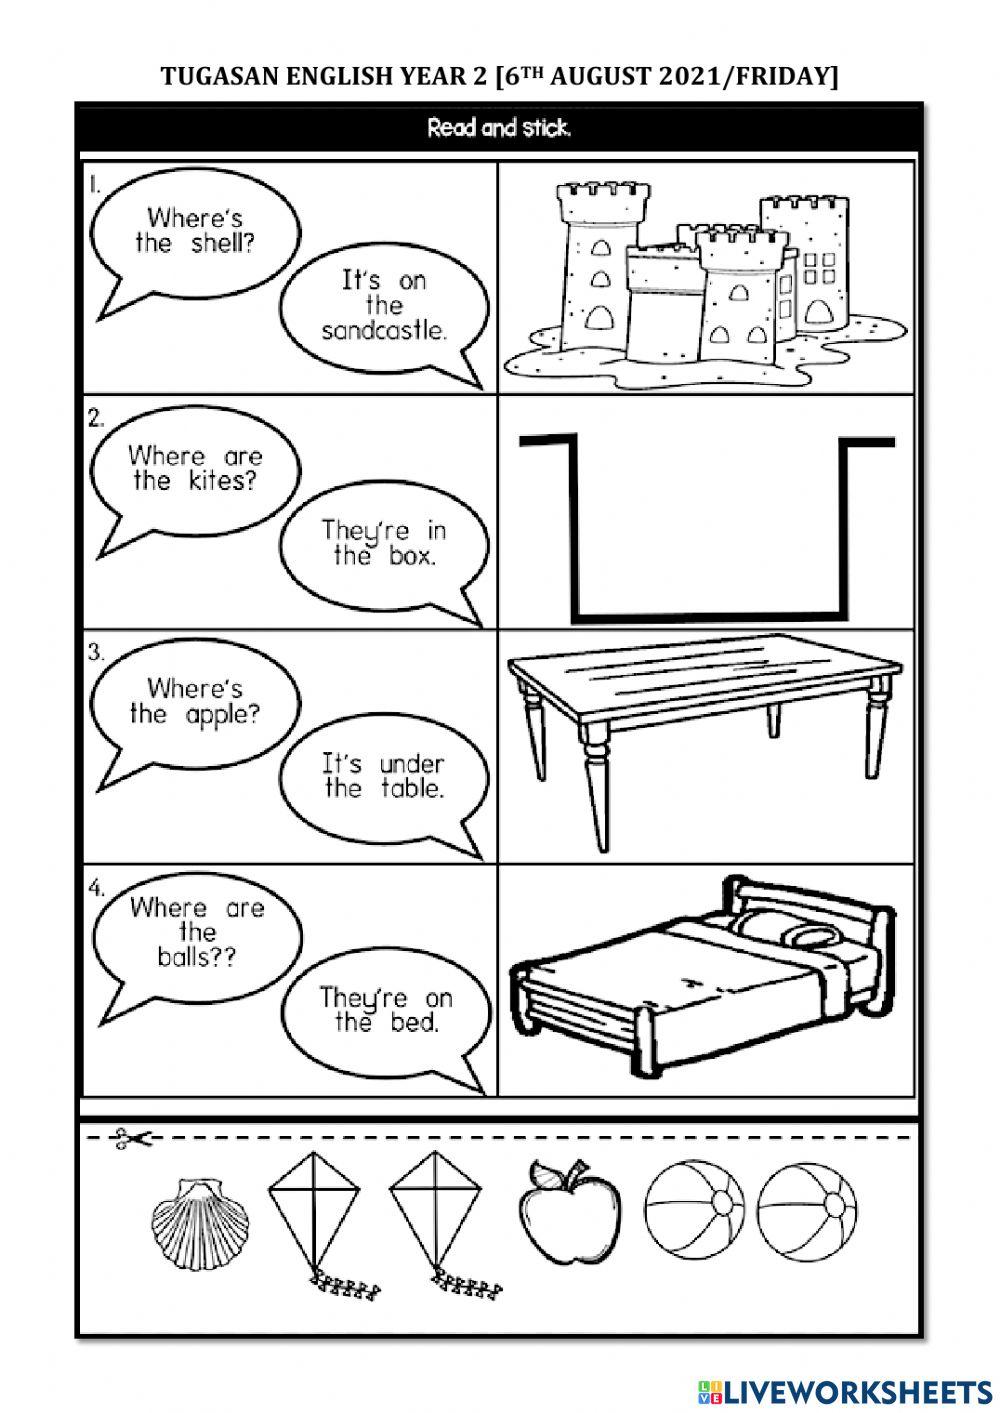 Unit 9: At the beach (Where is-are) worksheet | Live Worksheets